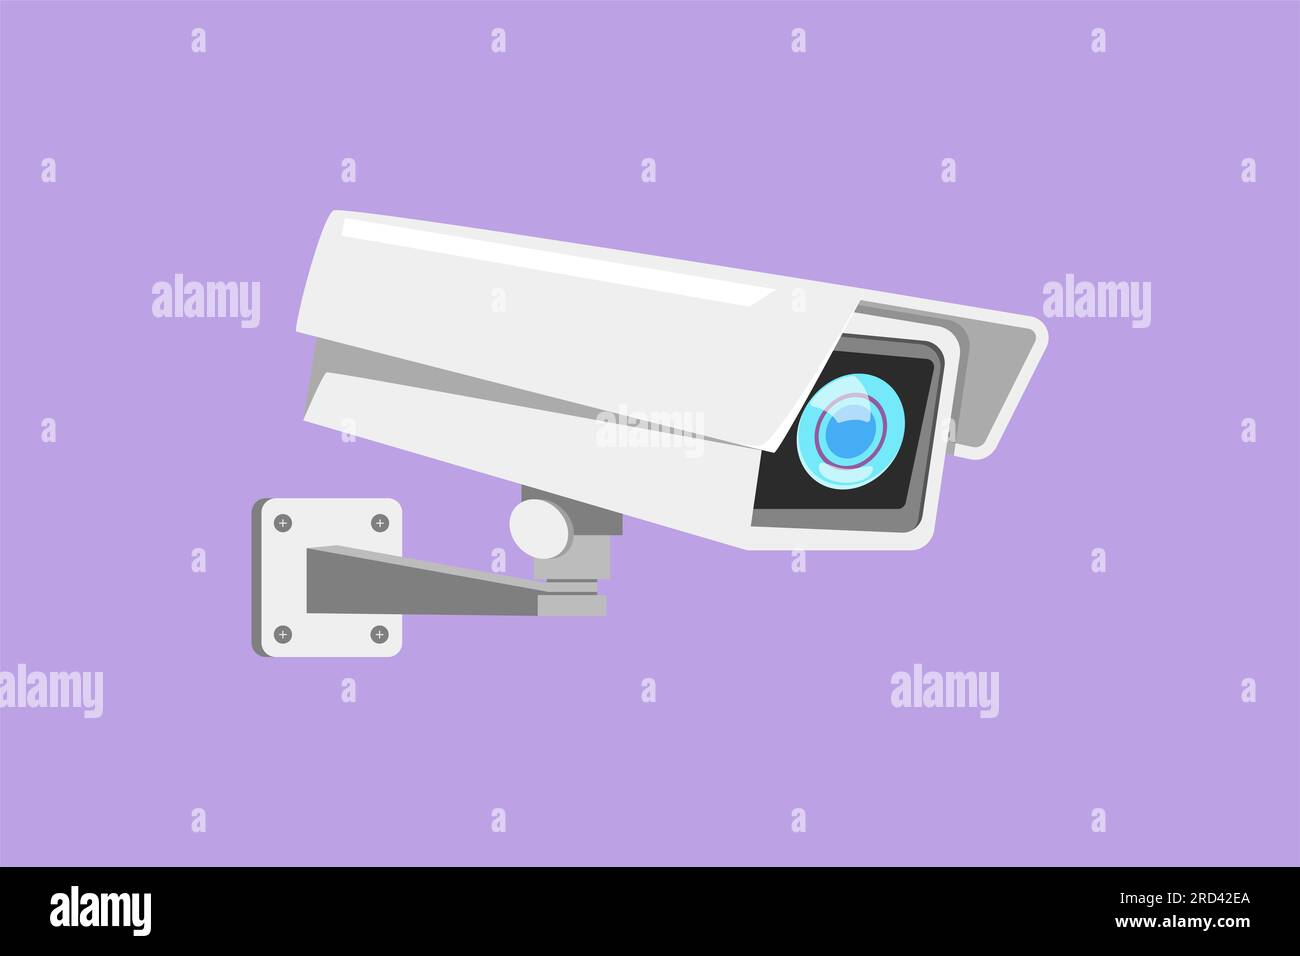 Cartoon flat style drawing of CCTV with a box shape installed on the ...